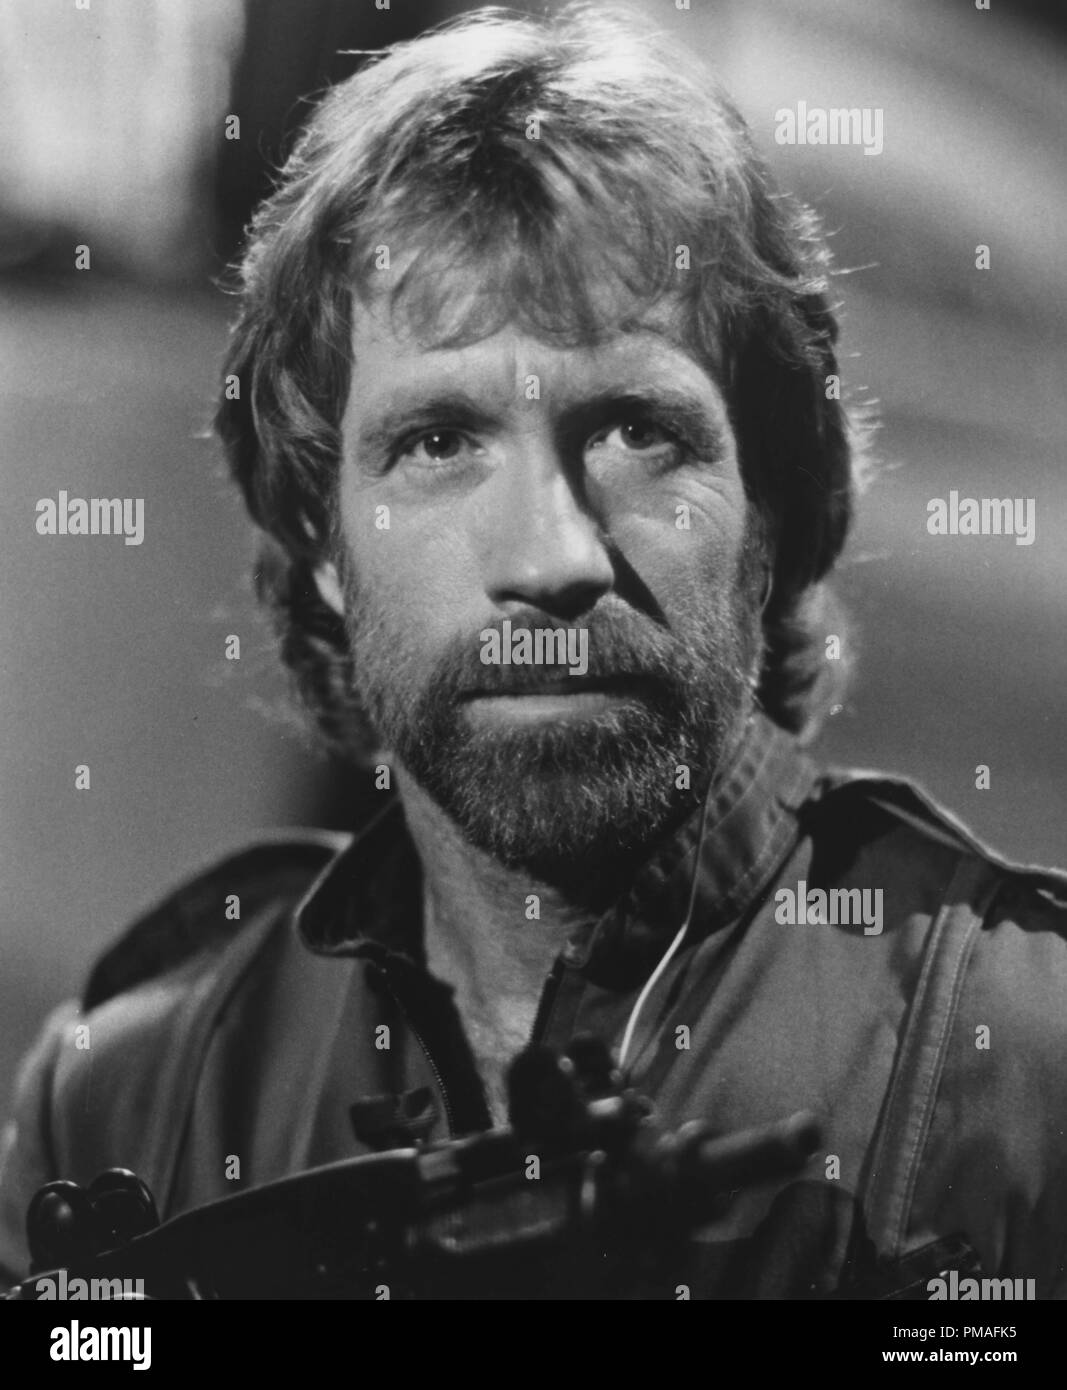 Chuck Norris in 'The Delta Force', 1986 Golan Globus Productions File Reference # 32633 668THA Stock Photo